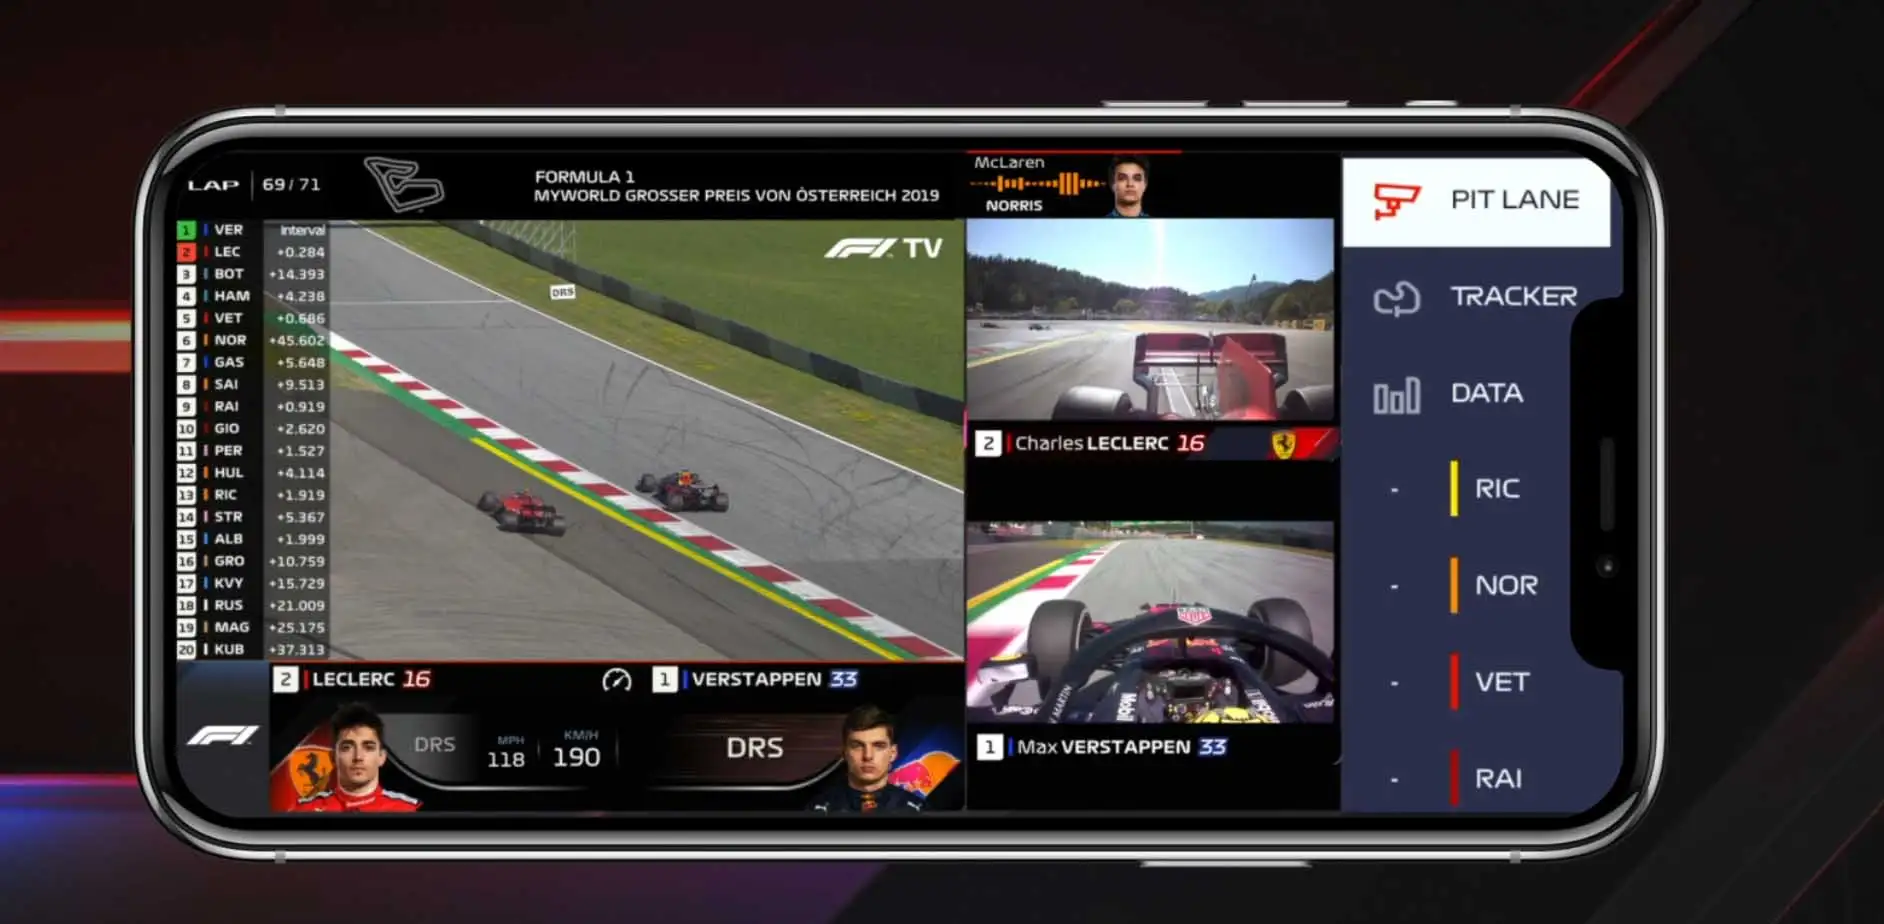 Sign up for a seven-day free trial on F1 TV Pro